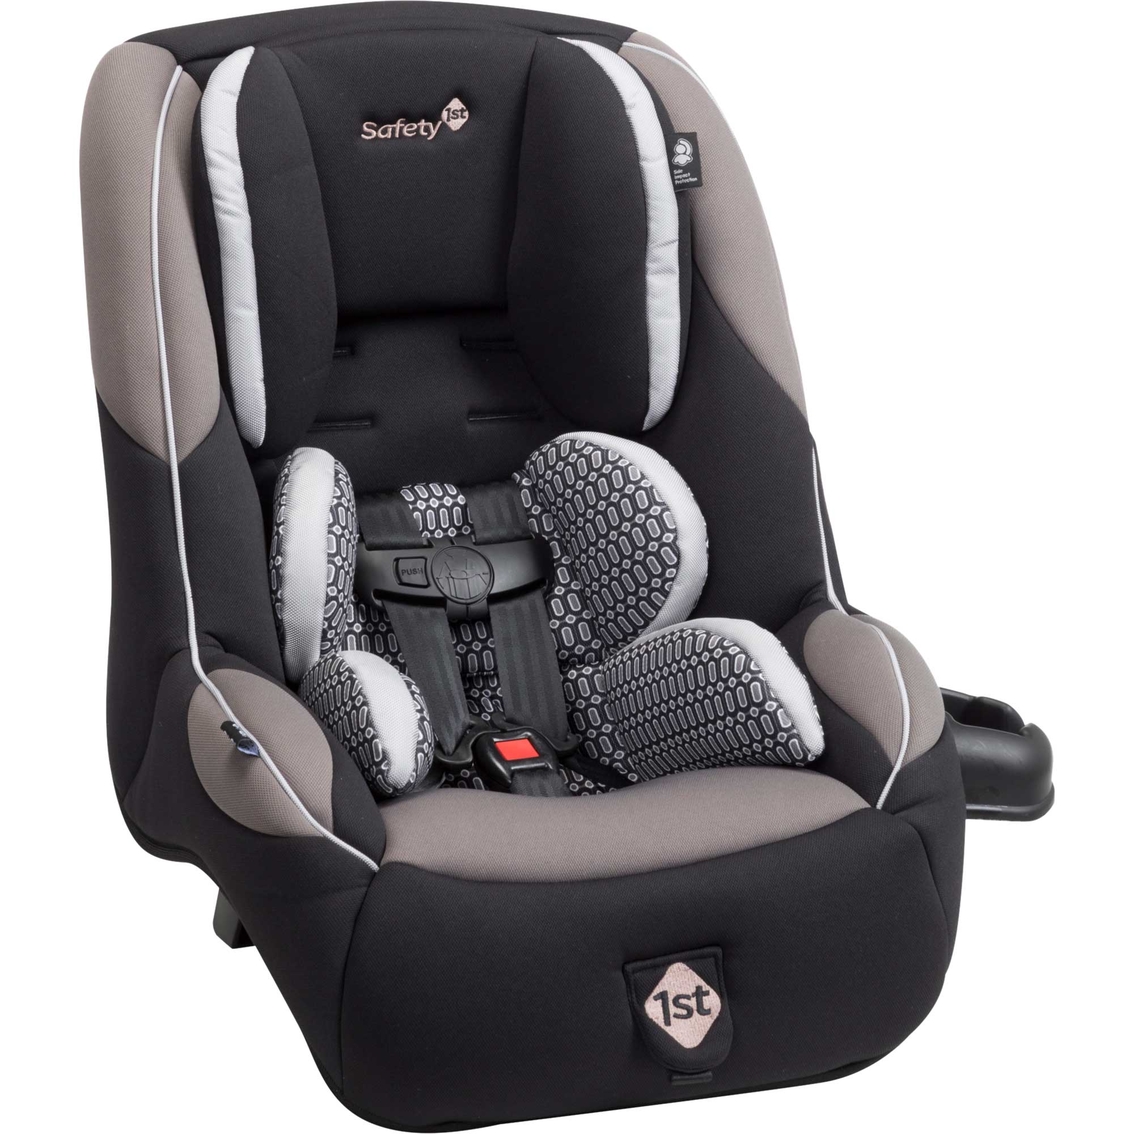 Safety 1st Guide 65 Air Convertible Car Seat, Chambers (Black, Espresso & Silver) - Image 2 of 3